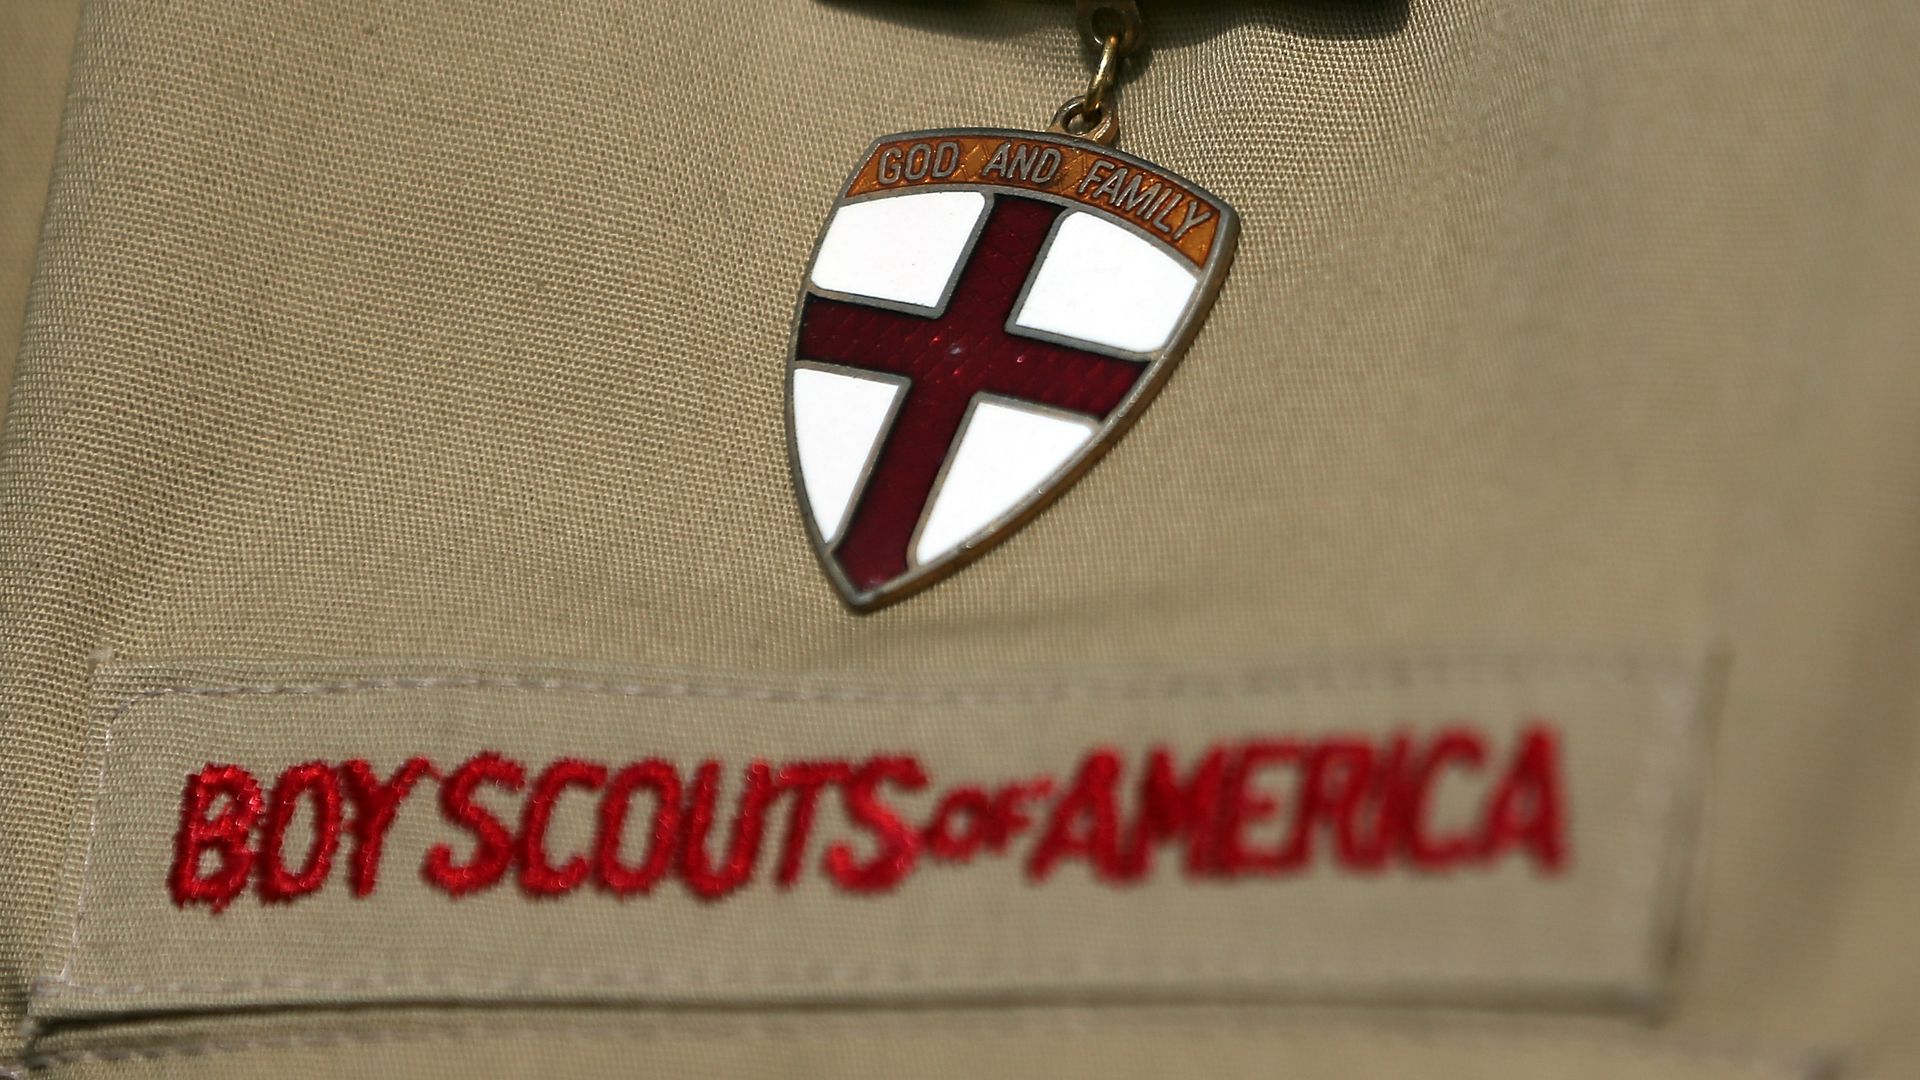 Photo of a Boy Scouts of America uniform with a pin saying "God and Country"